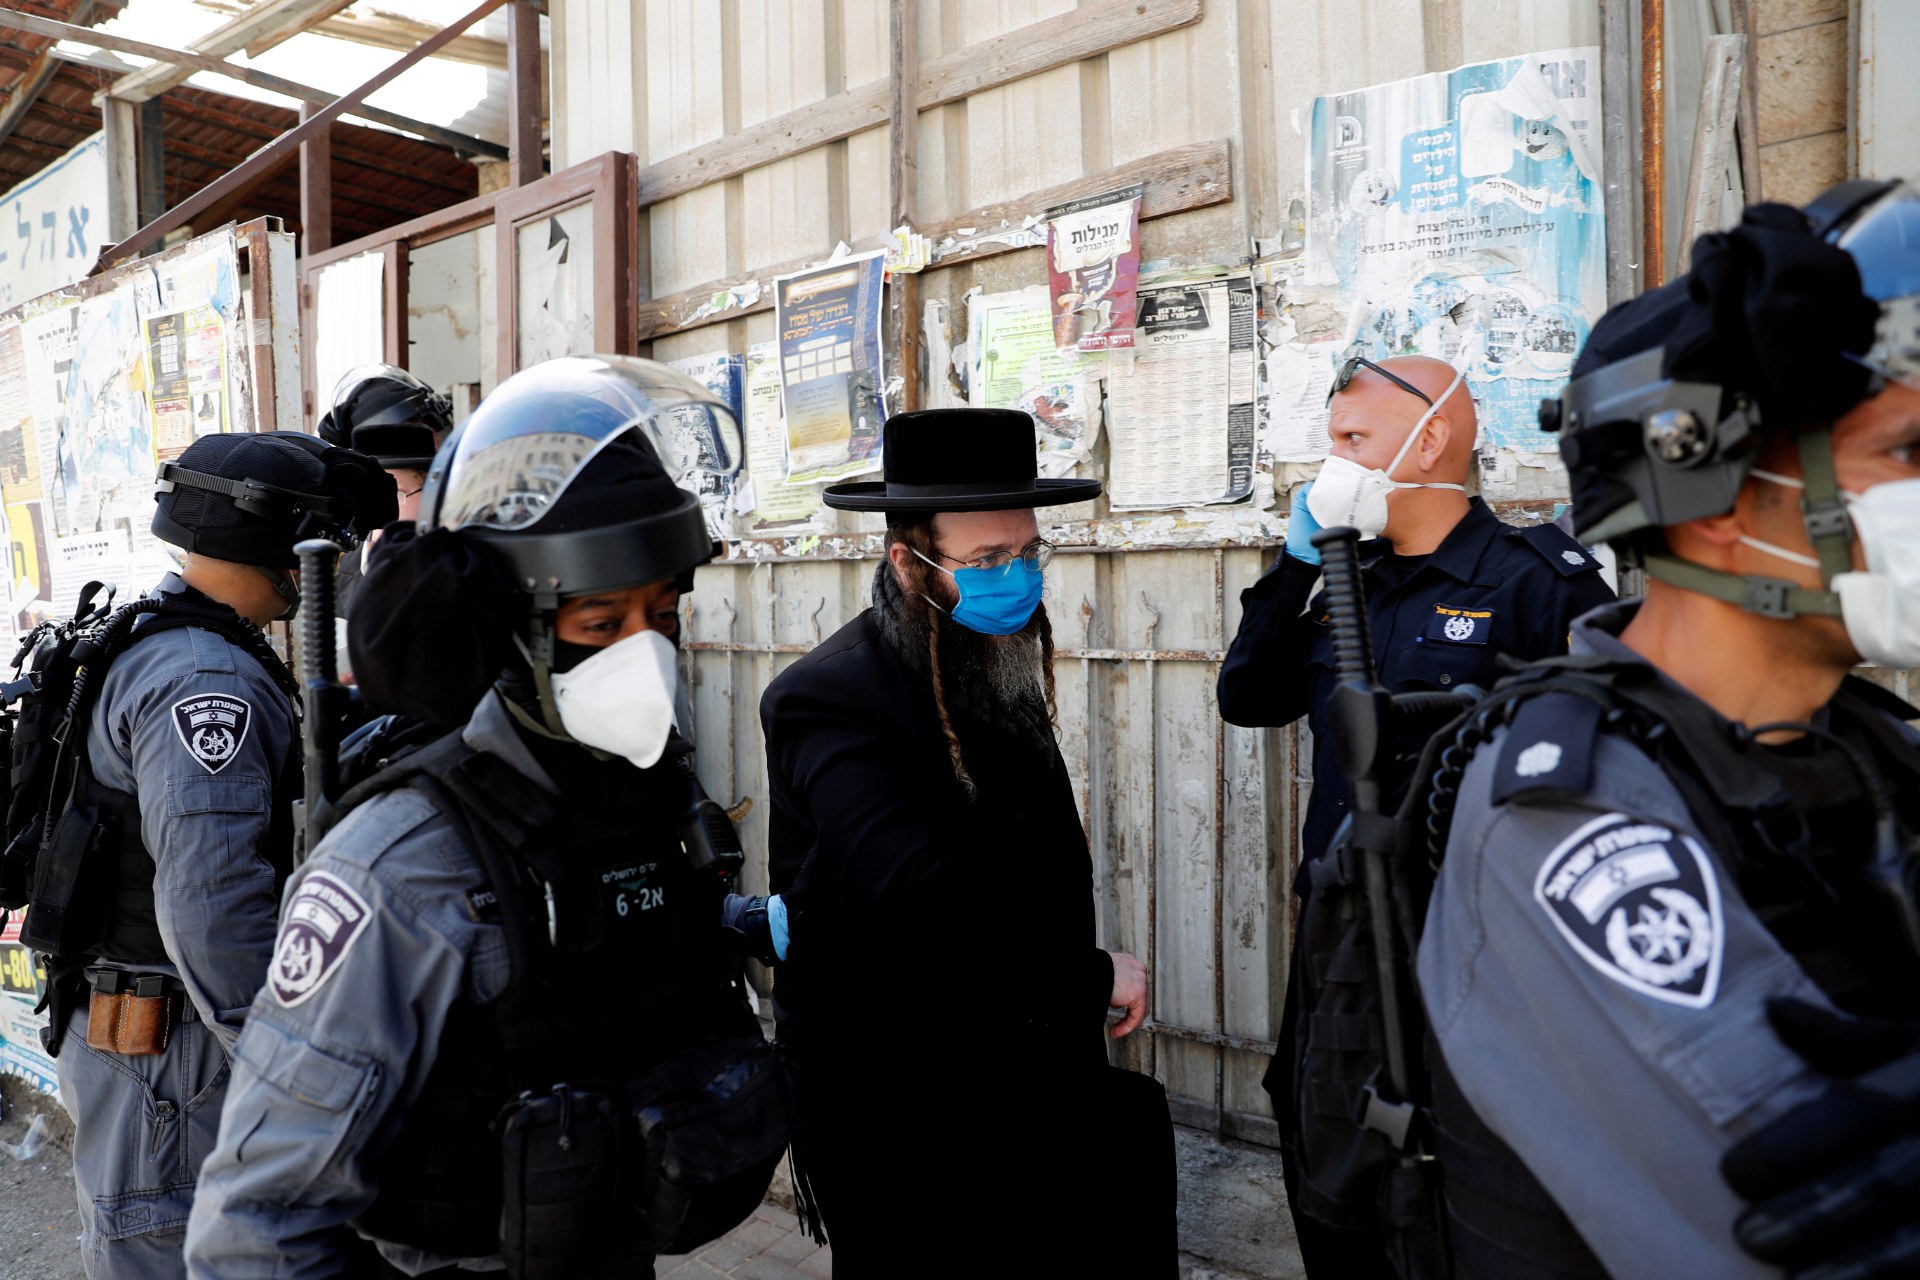 Israeli police detain an Ultra-Orthodox Jewish man for defying government restrictions set in place to curb the spread of the coronavirus disease, in th Mea Shearim neighborhood of Jerusalem (Reuters)